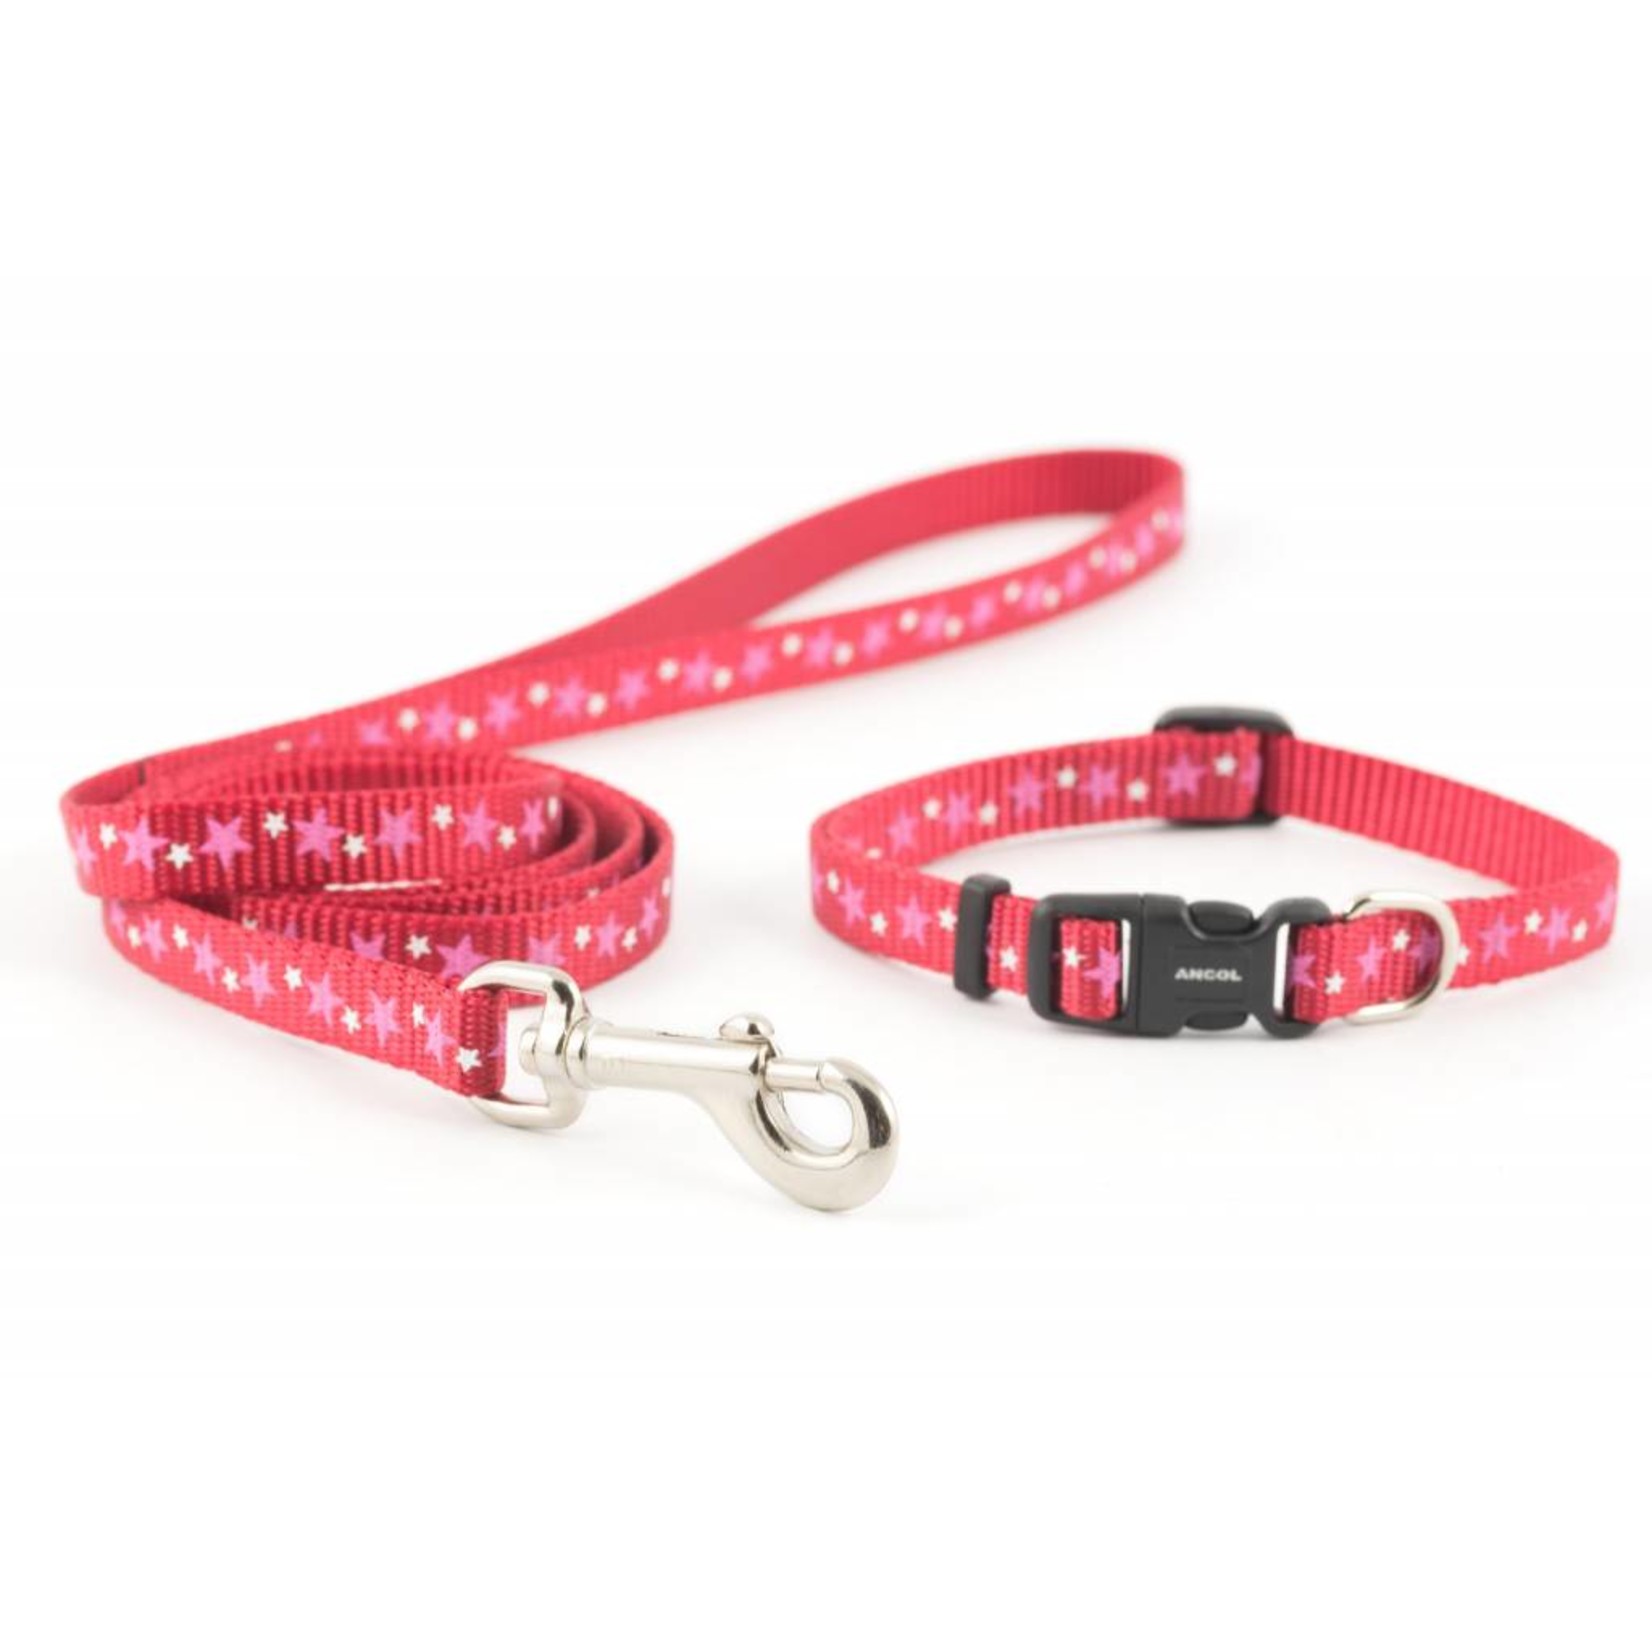 Ancol Small Bite Stars Collar & Lead Set For Puppies & Small Dogs,Red